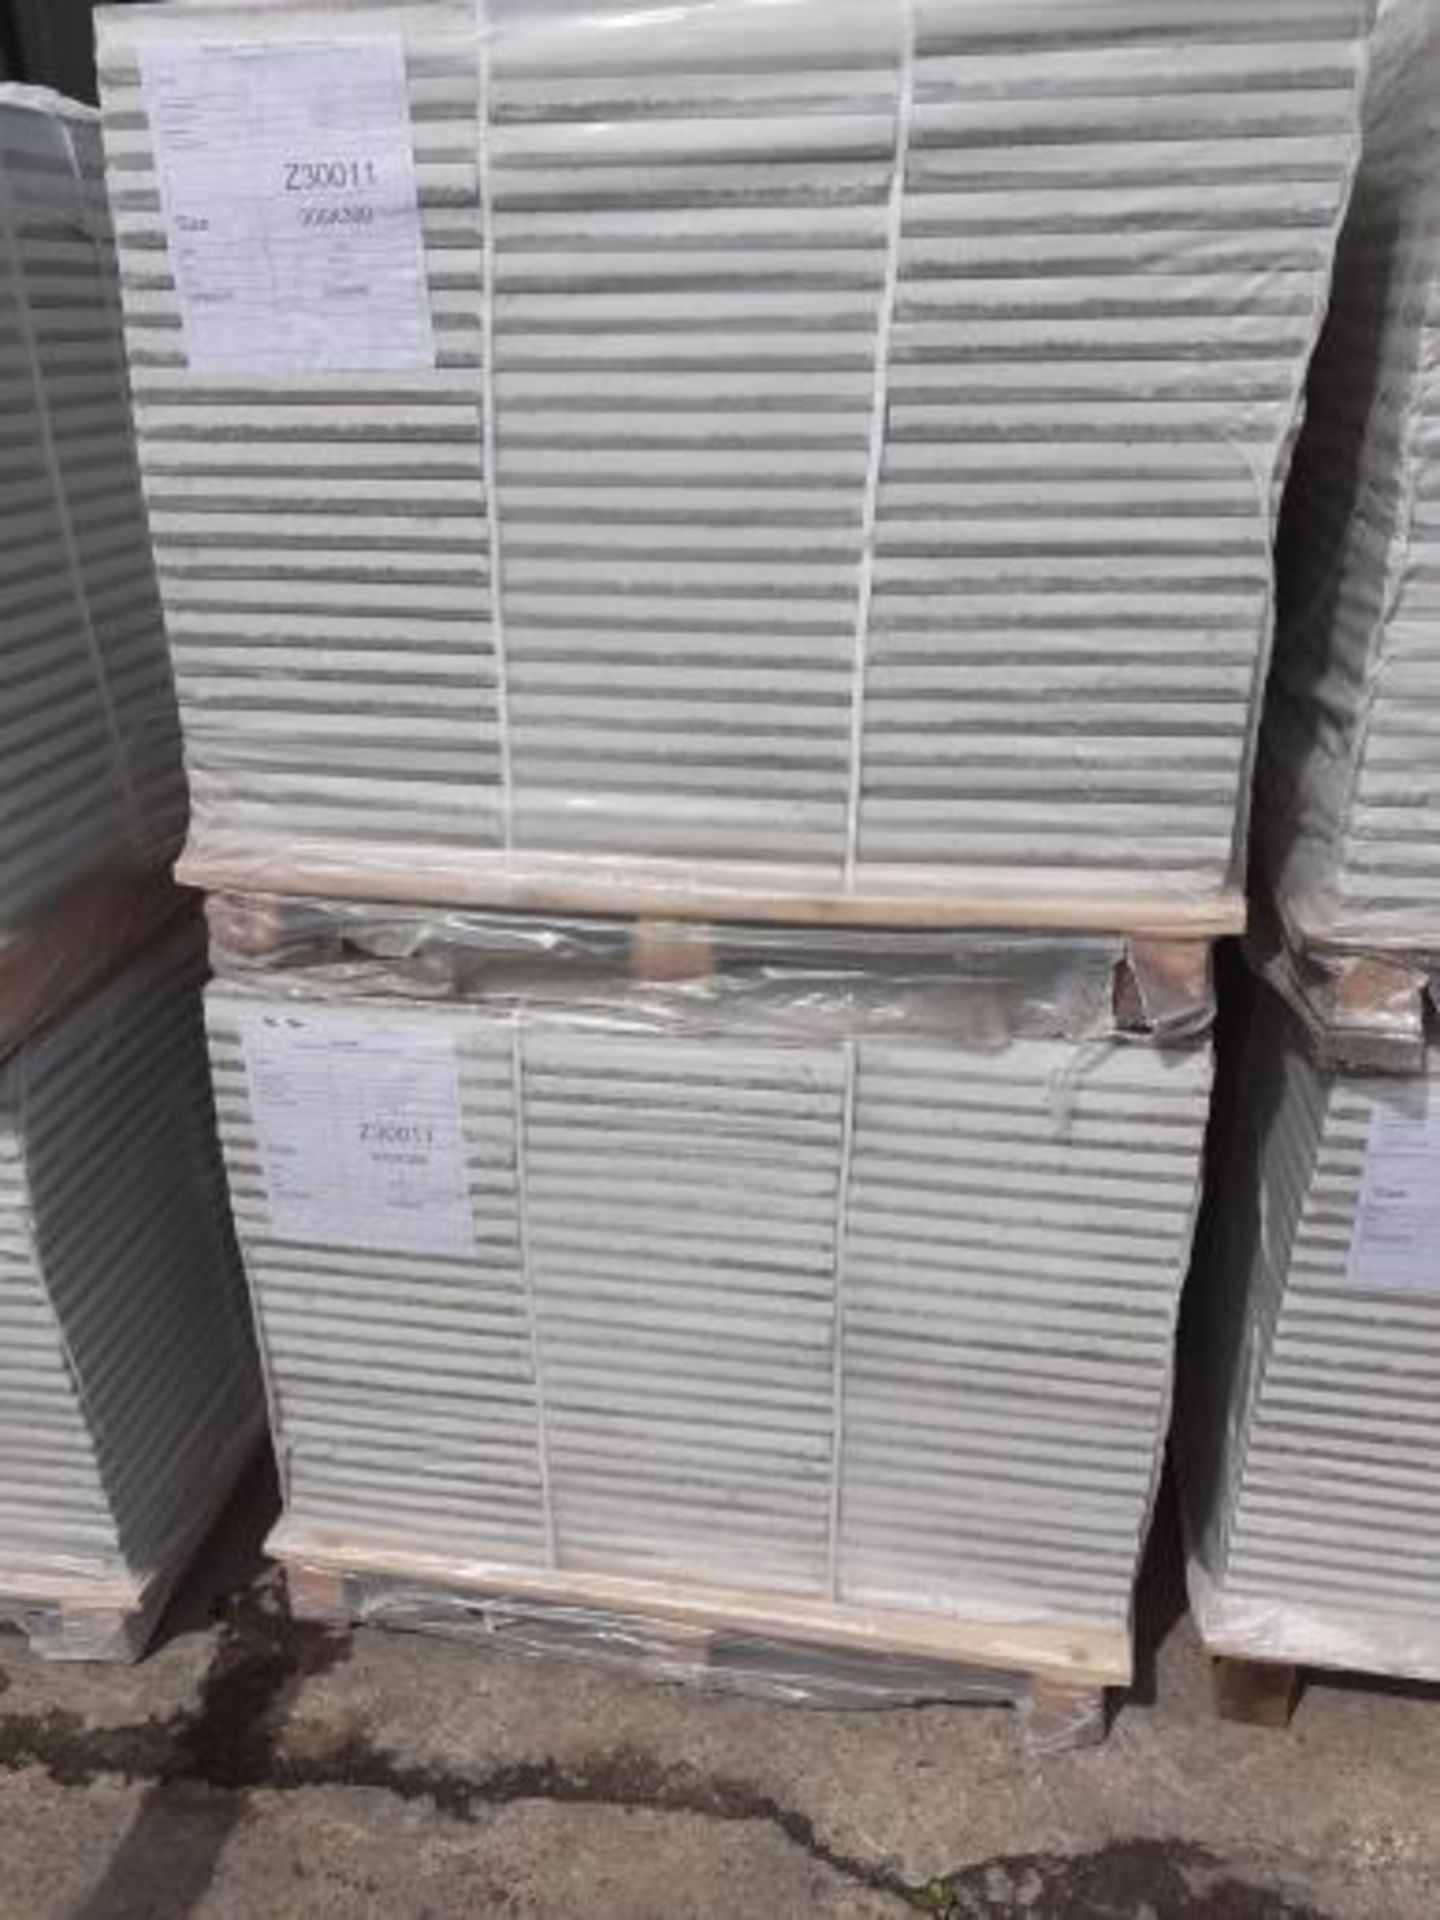 1 PALLET OF BRAND NEW TERRAZZO COMMERCIAL FLOOR TILES (Z30011), COVERS 24 SQUARE YARDS *PLUS VAT* - Image 2 of 14